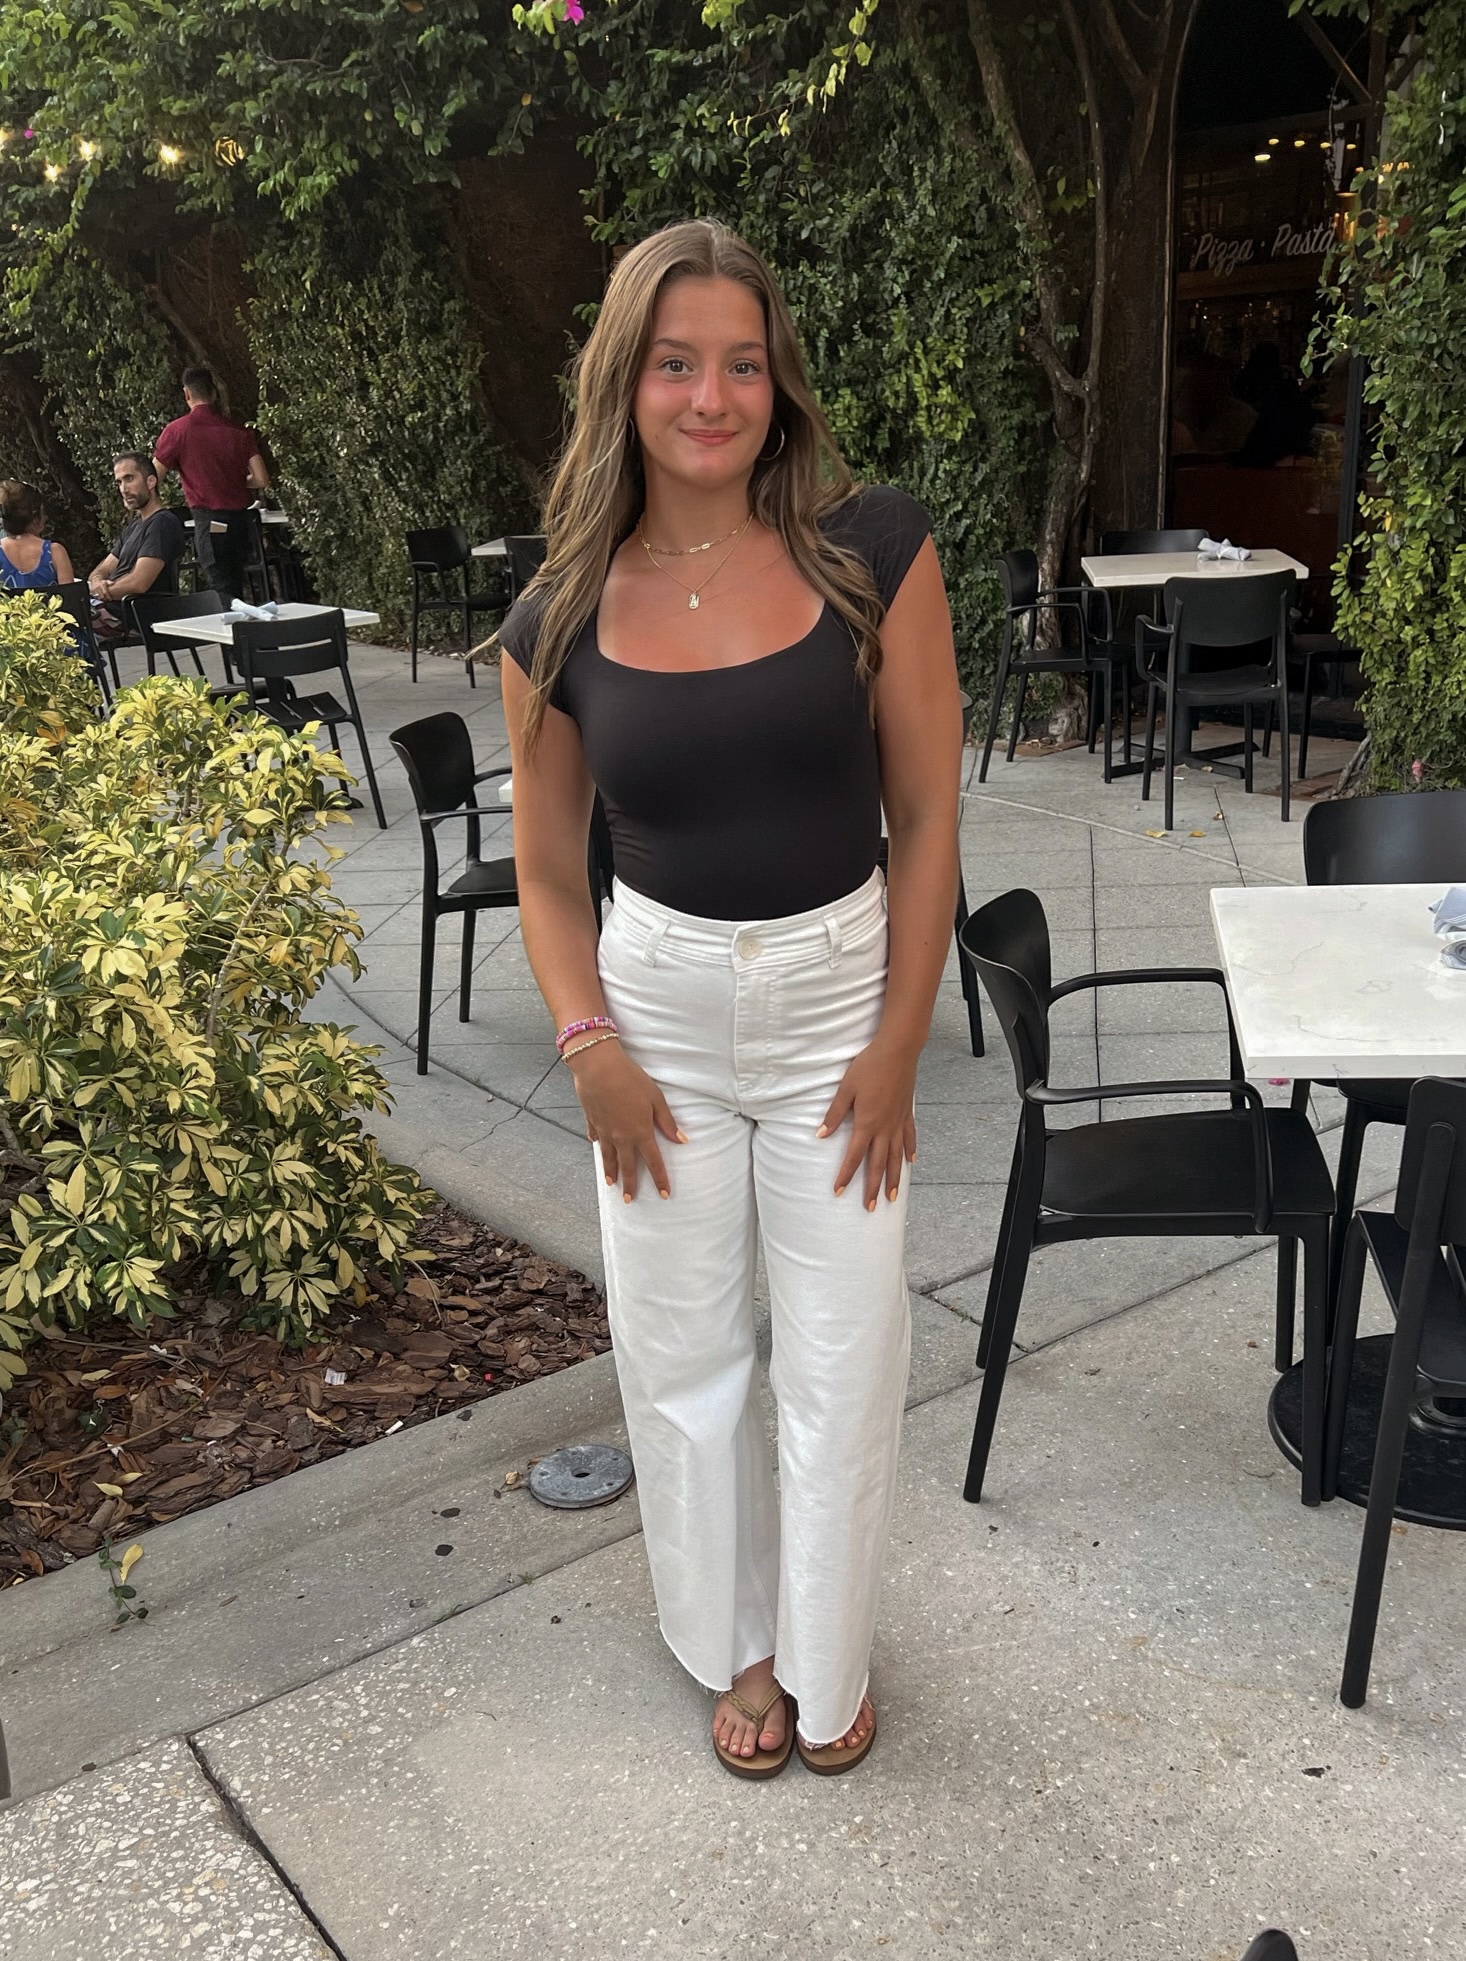 Color photograph of Ava Jackowsky, a white female with light brown hair and brown eyes, standing smiling at the camera. She is wearing a black cap sleeve top and white jeans with flip flops. The background is the outdoor seating area of a restaraunt in Sarasota, Florida.